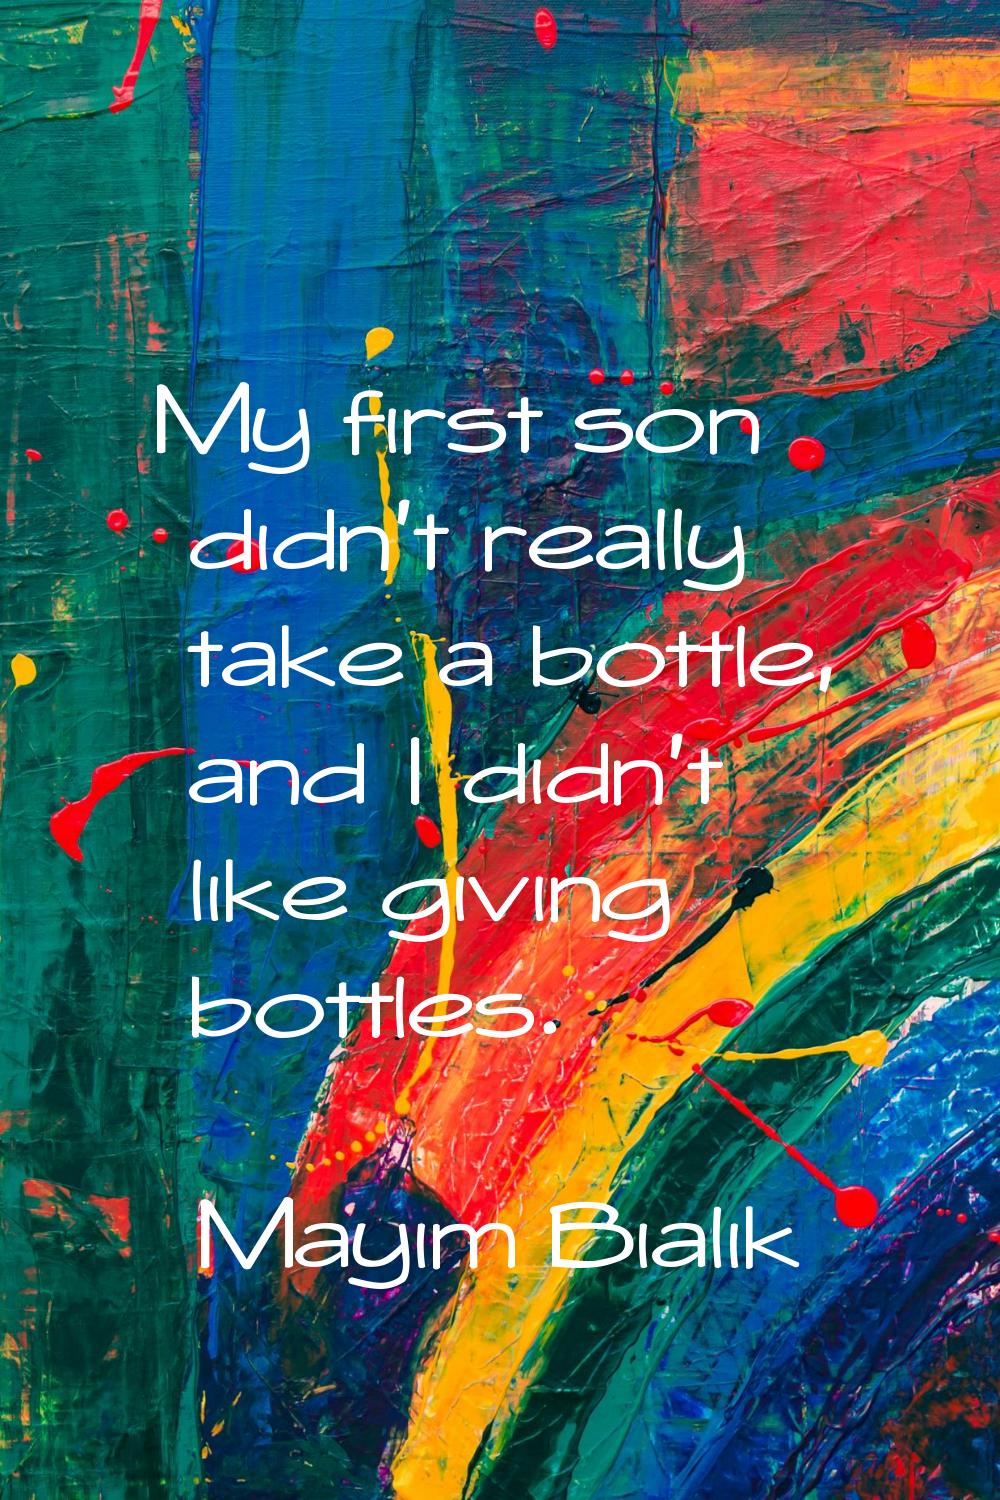 My first son didn't really take a bottle, and I didn't like giving bottles.